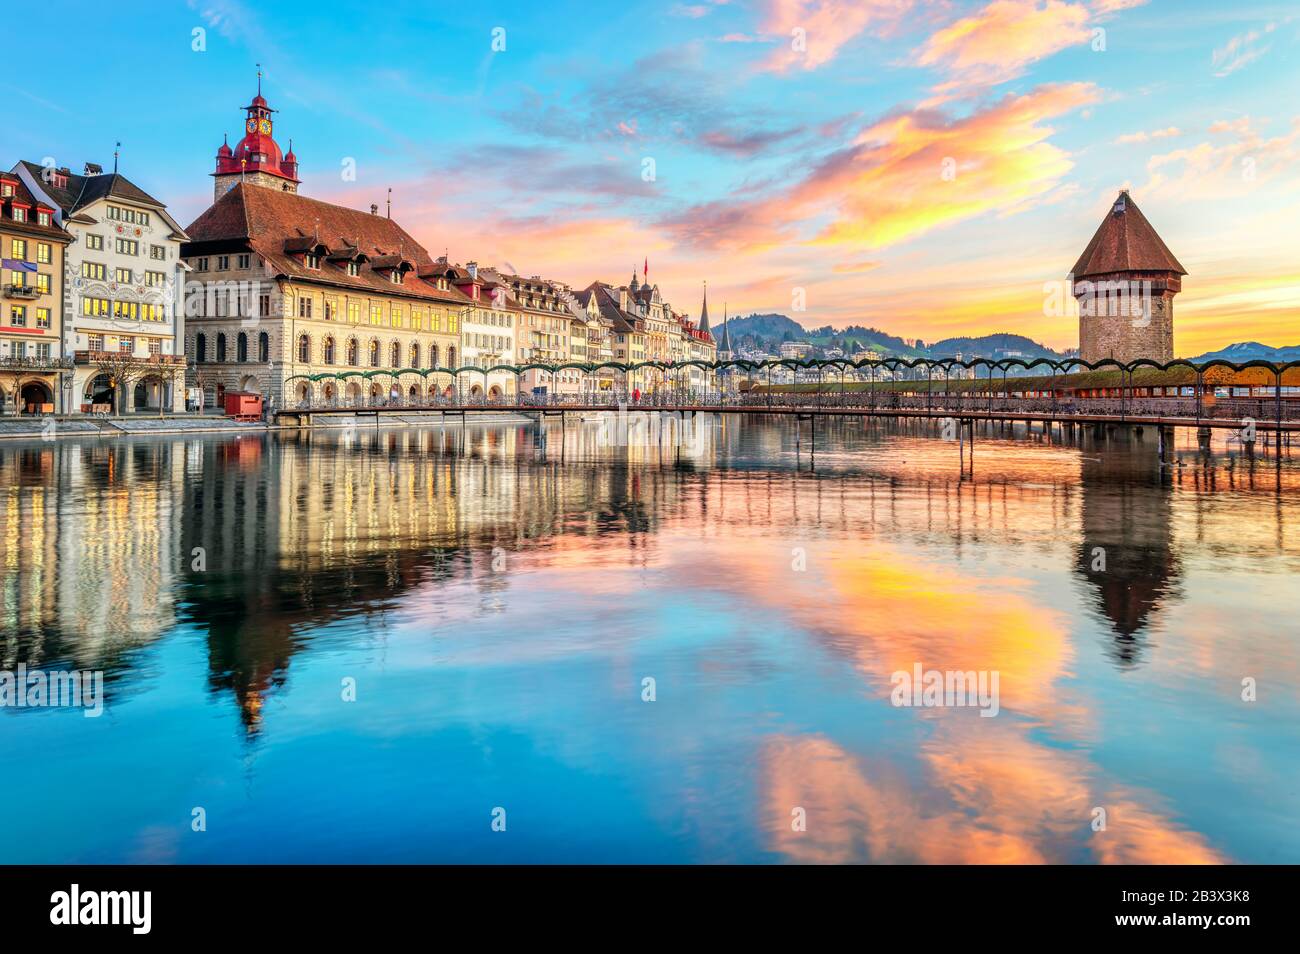 Historical wooden Chapel bridge and the Old town of Lucerne, Switzerland, reflecting in Reuss river on dramatical sunrise Stock Photo